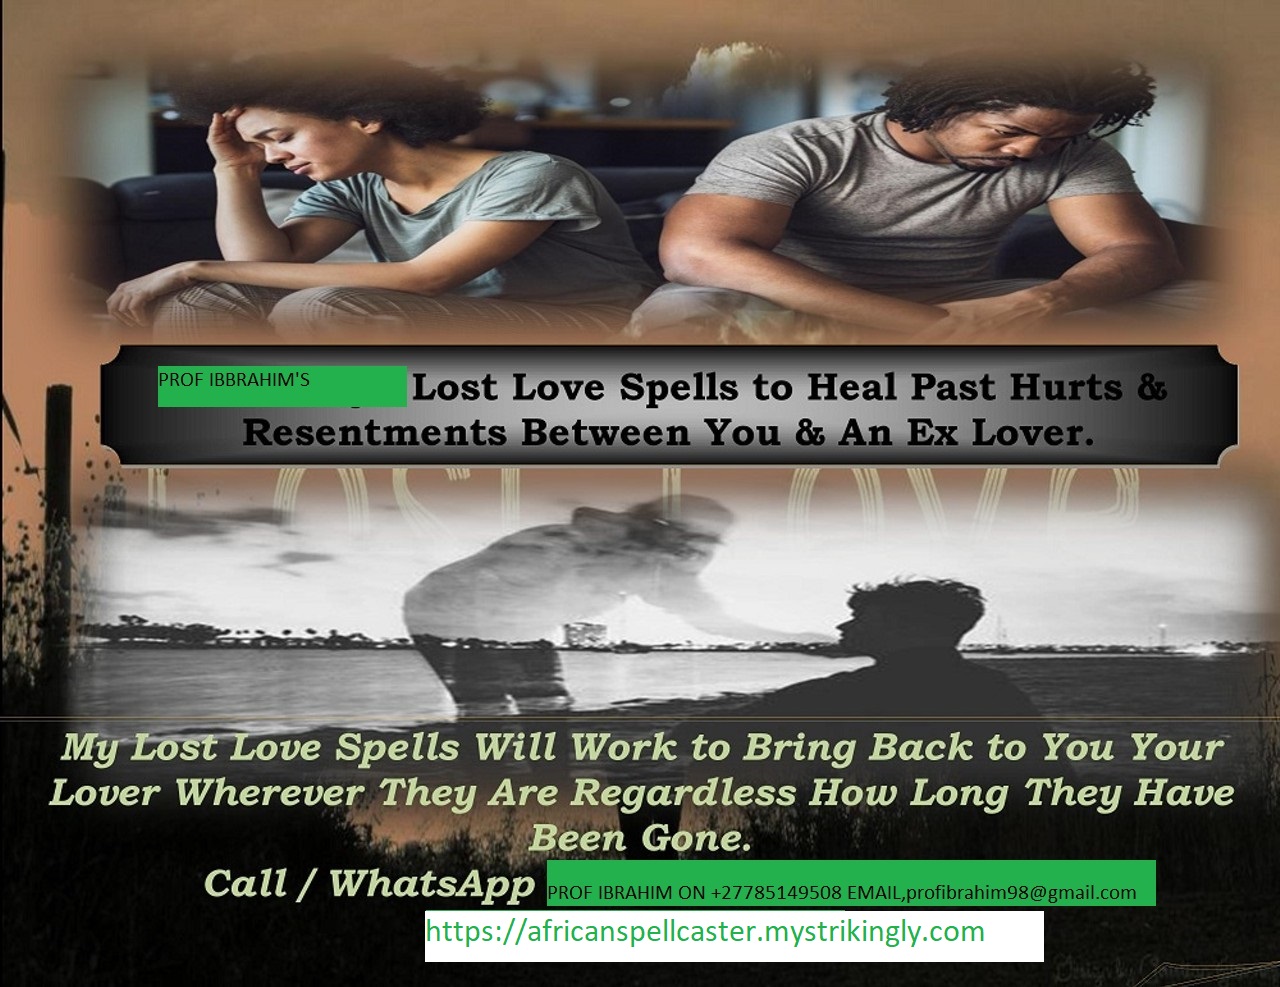 #ASTROLOGY TO CAST A COURT CASE SPELL TODISMISSED NEAR ME+27785149508